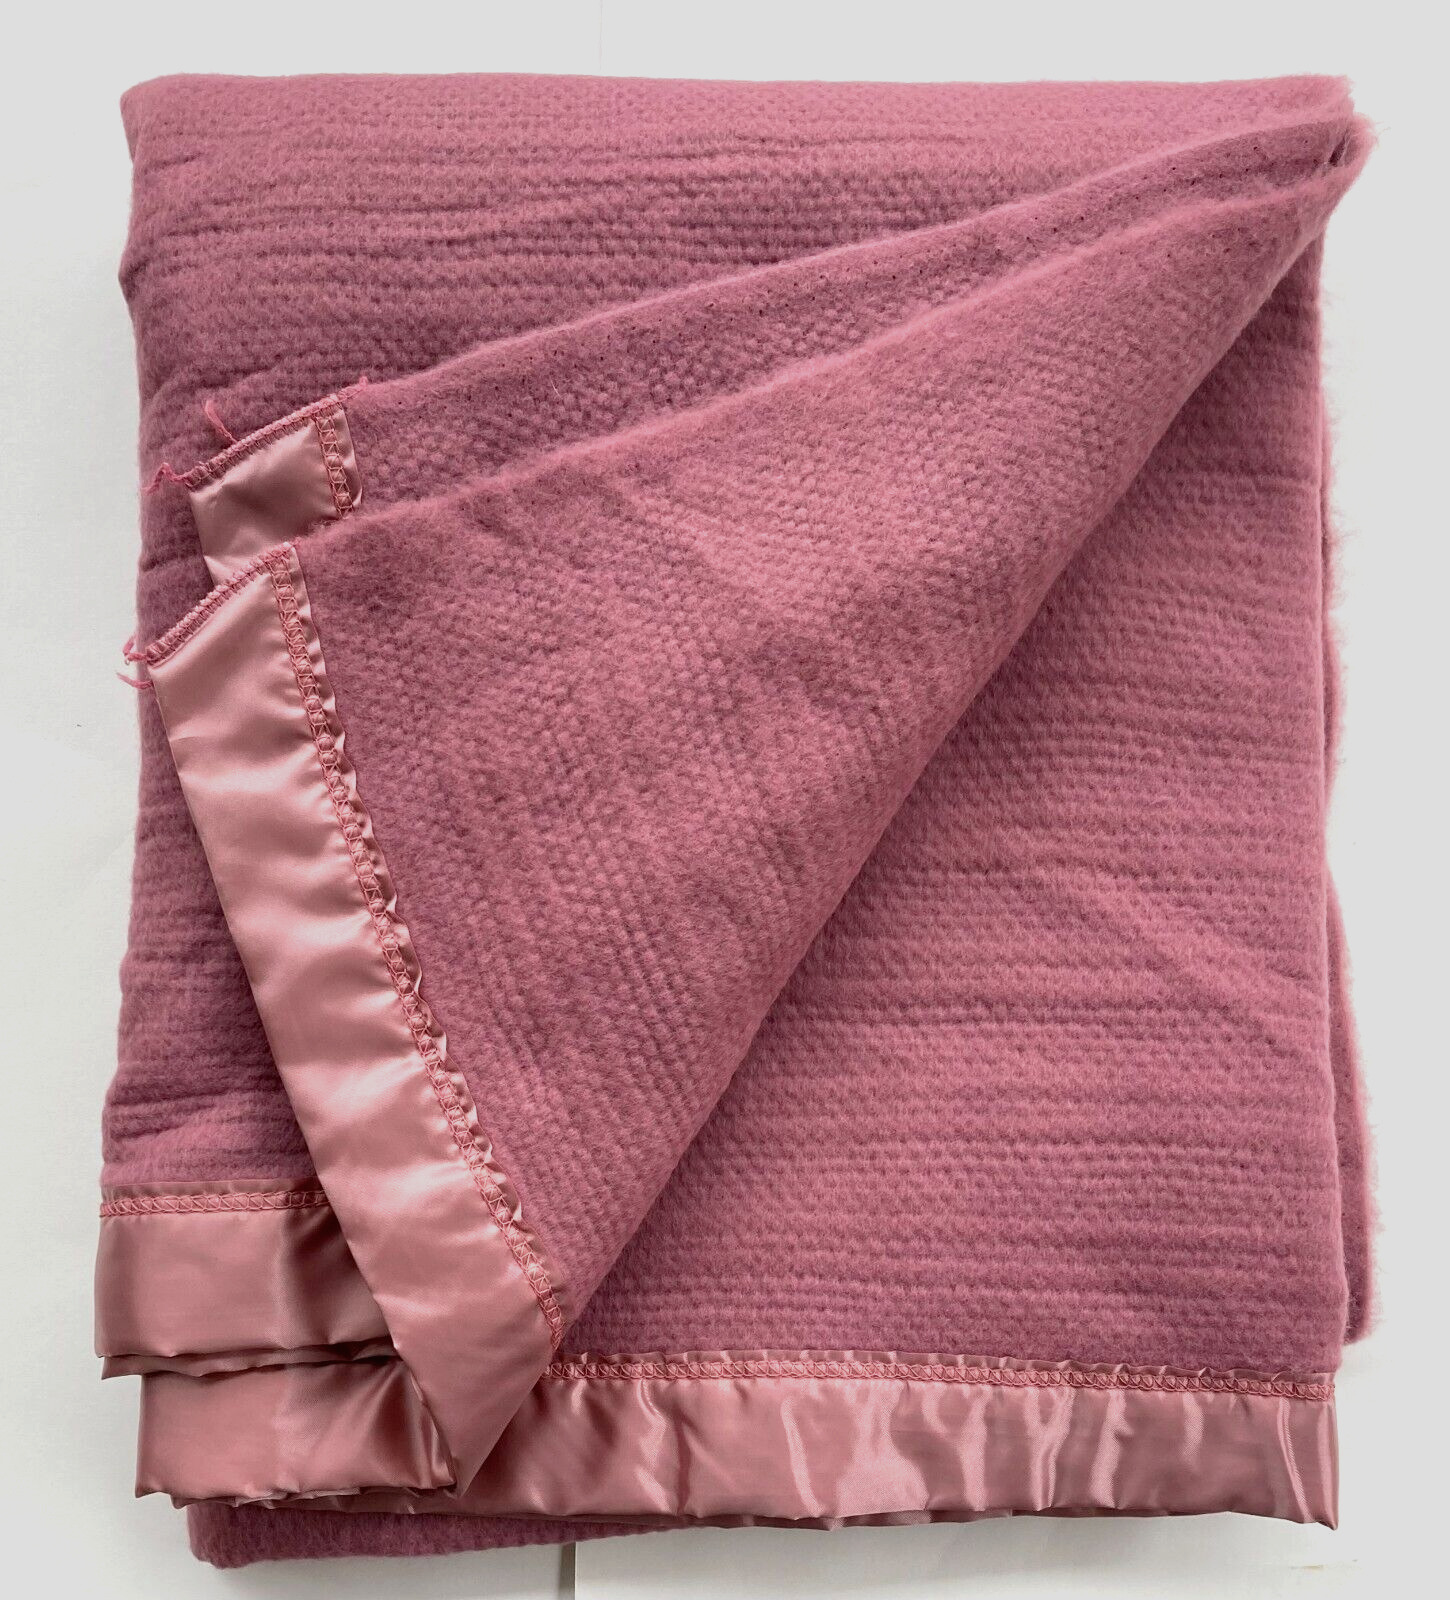 Waffle Weave Blanket TWIN Dusty Rose Satin Trim Thermal JC Penney Home